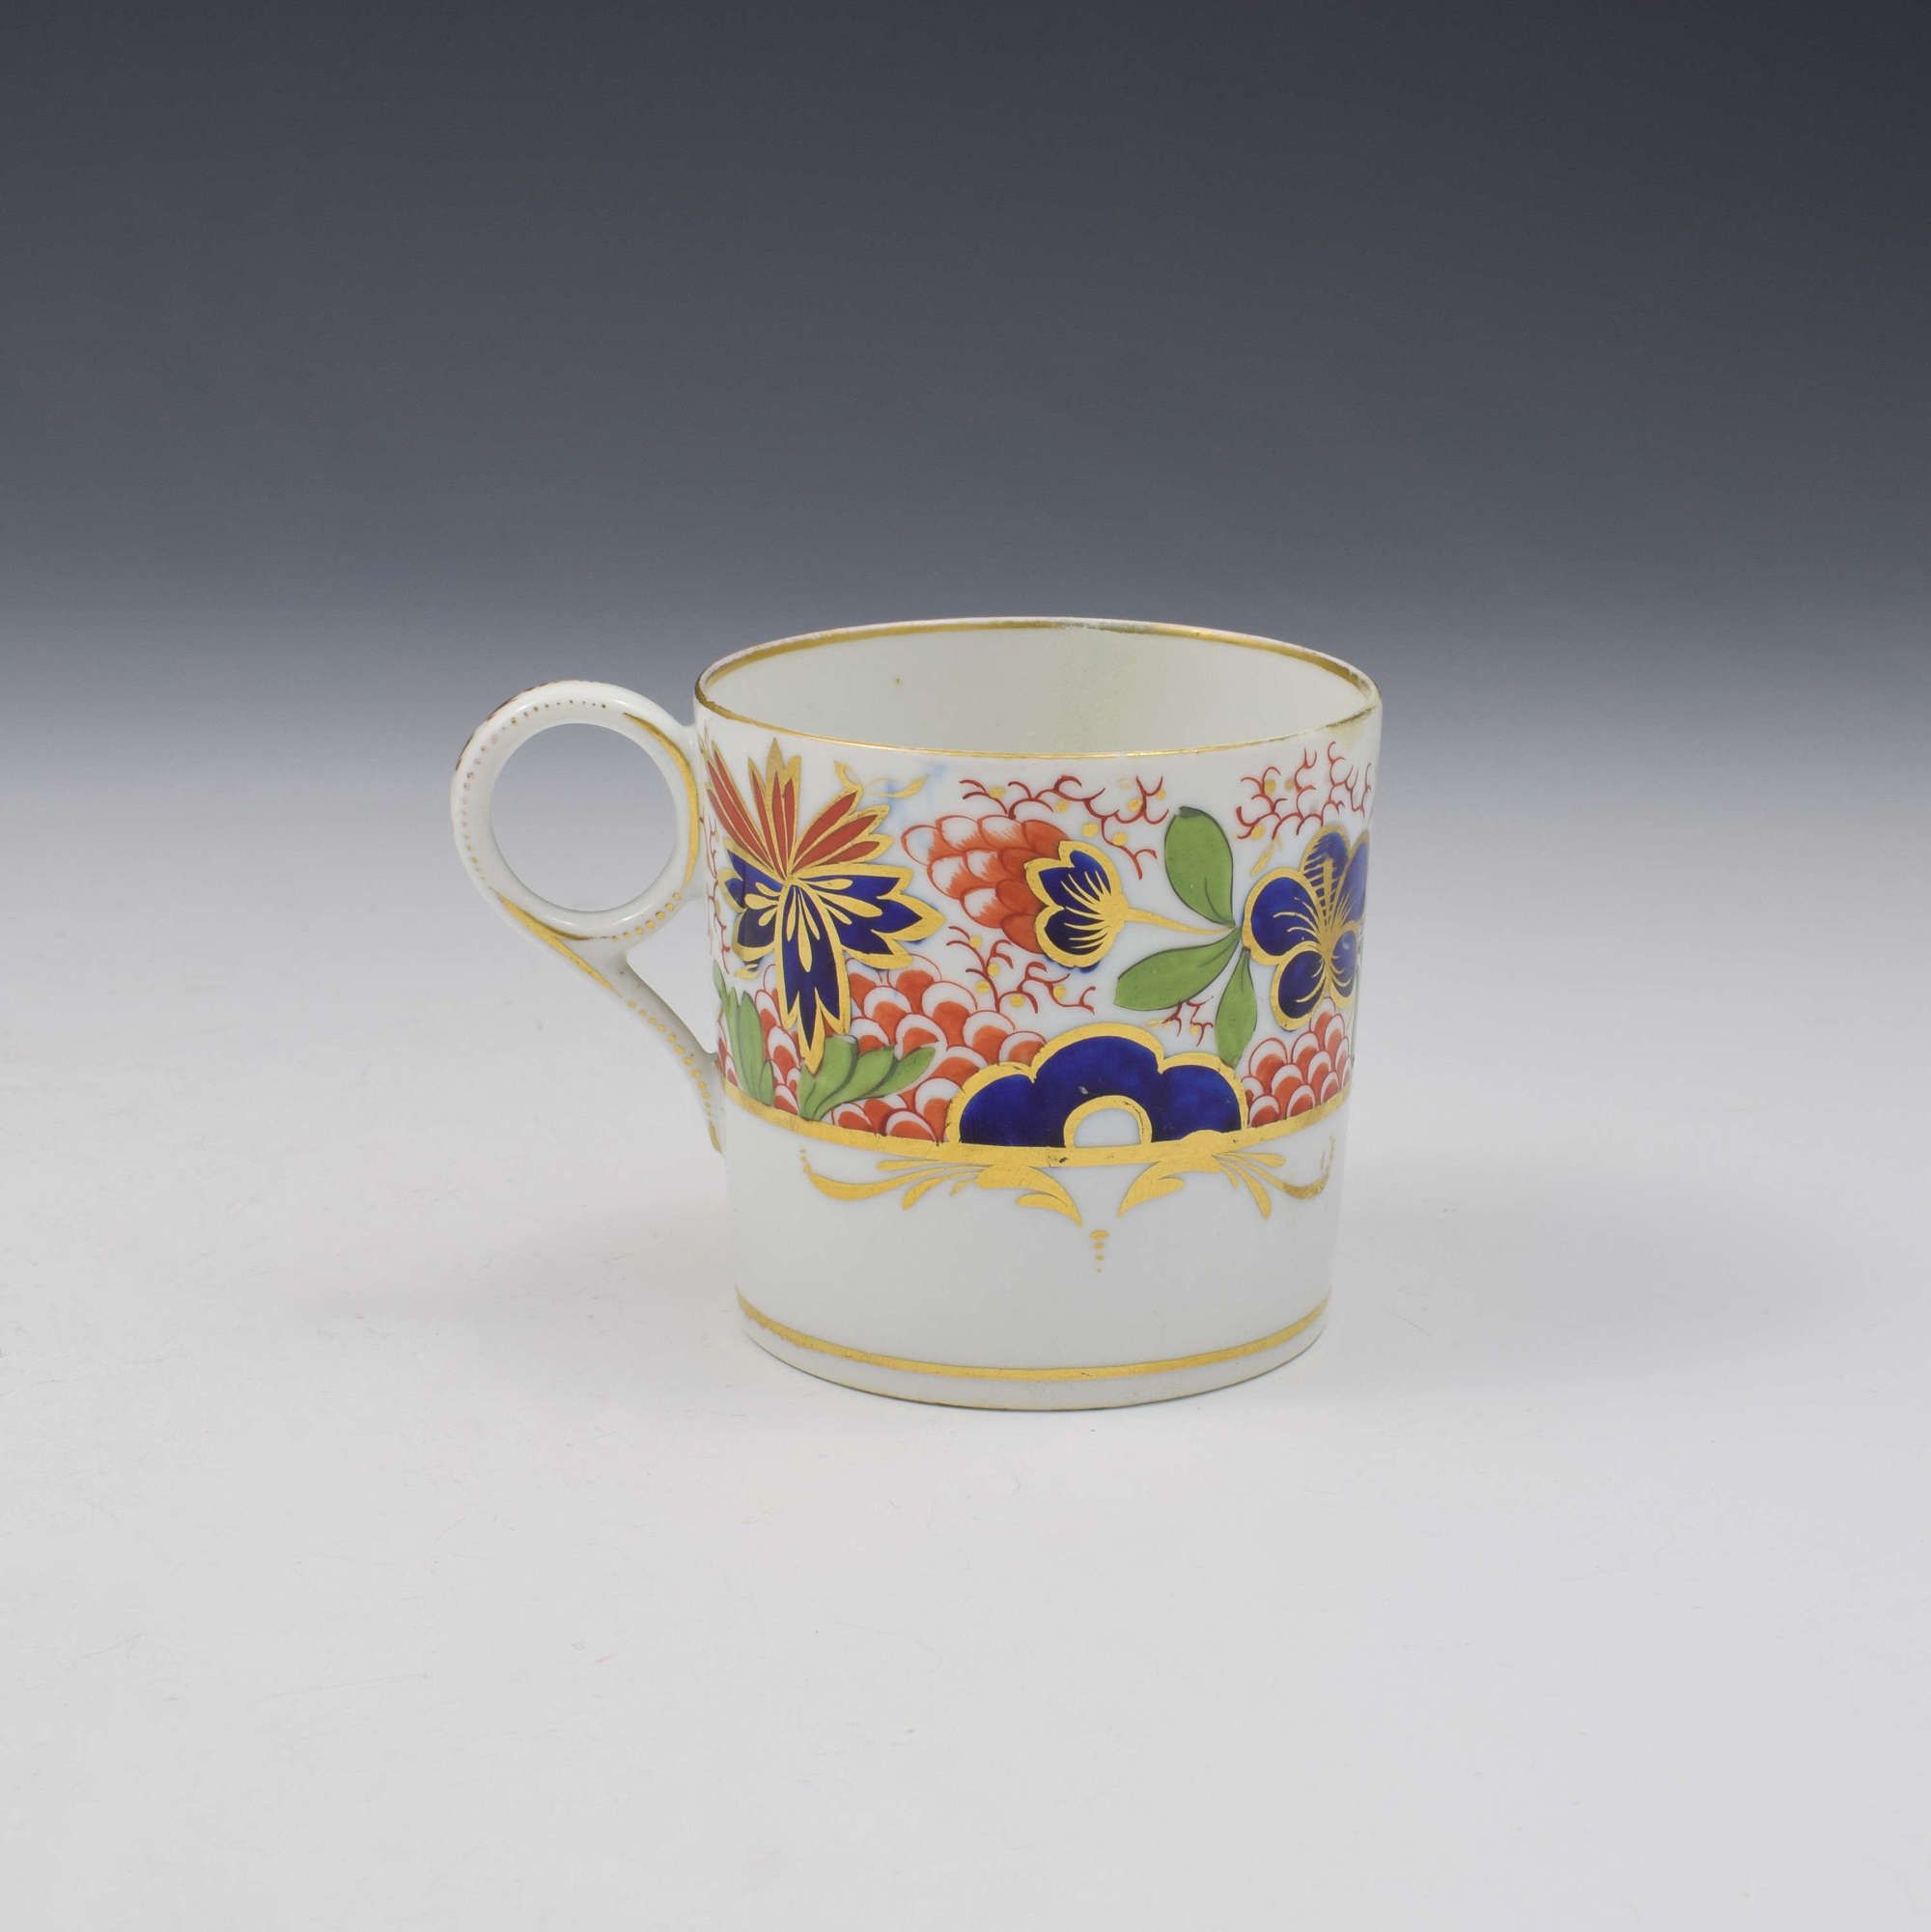 Chamberlain's Worcester Porcelain Coffee Can Pattern 492, c.1805